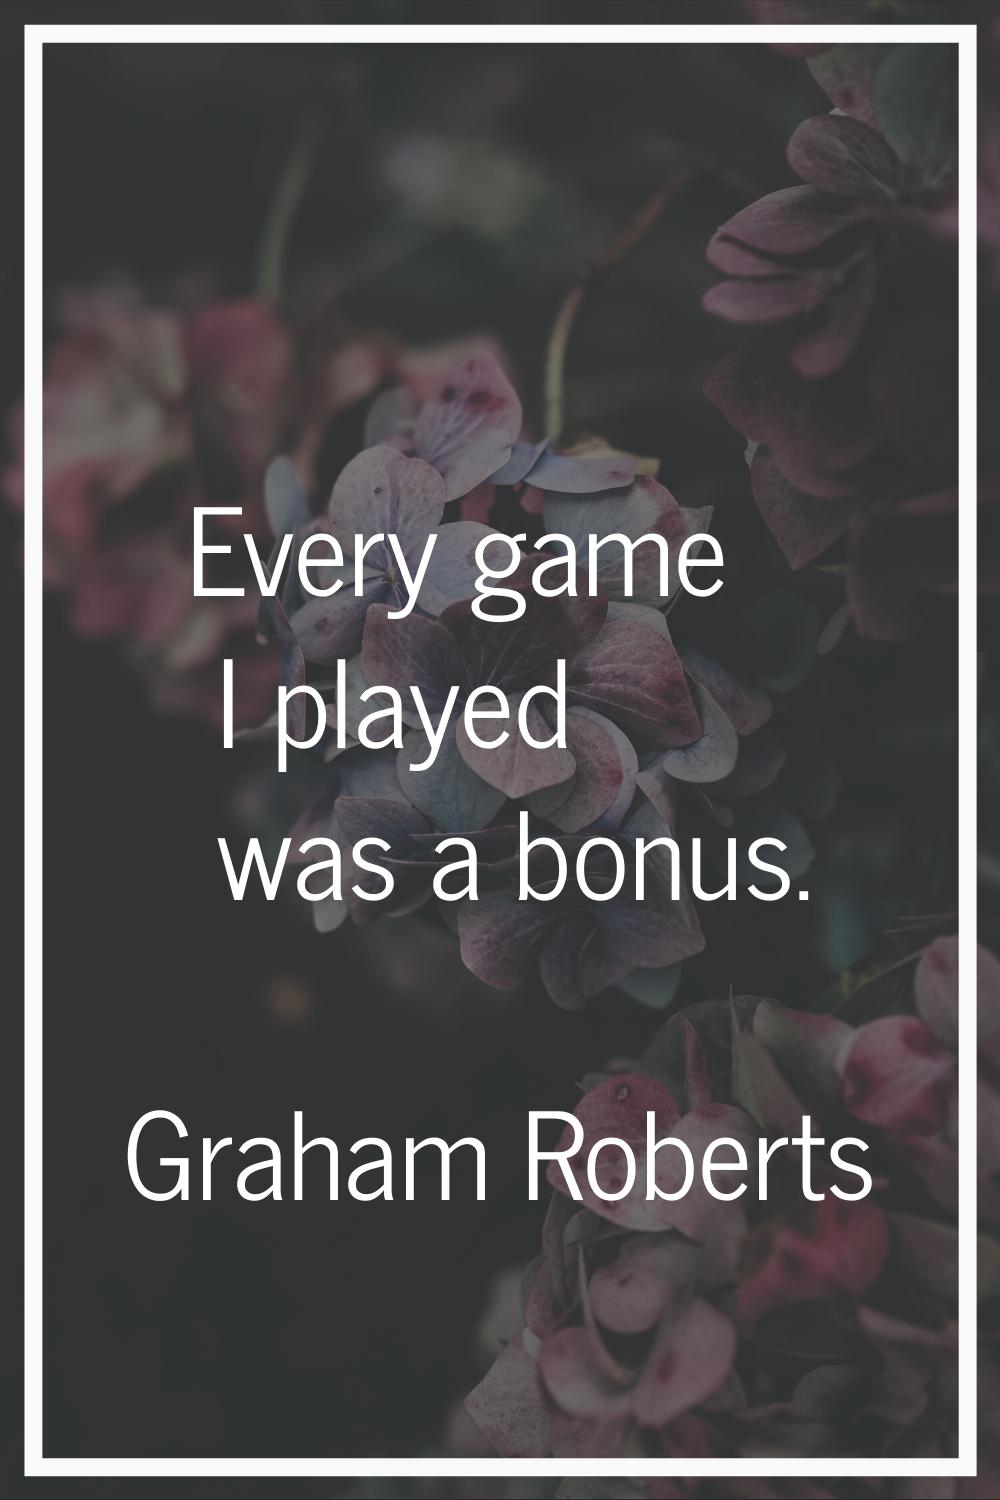 Every game I played was a bonus.